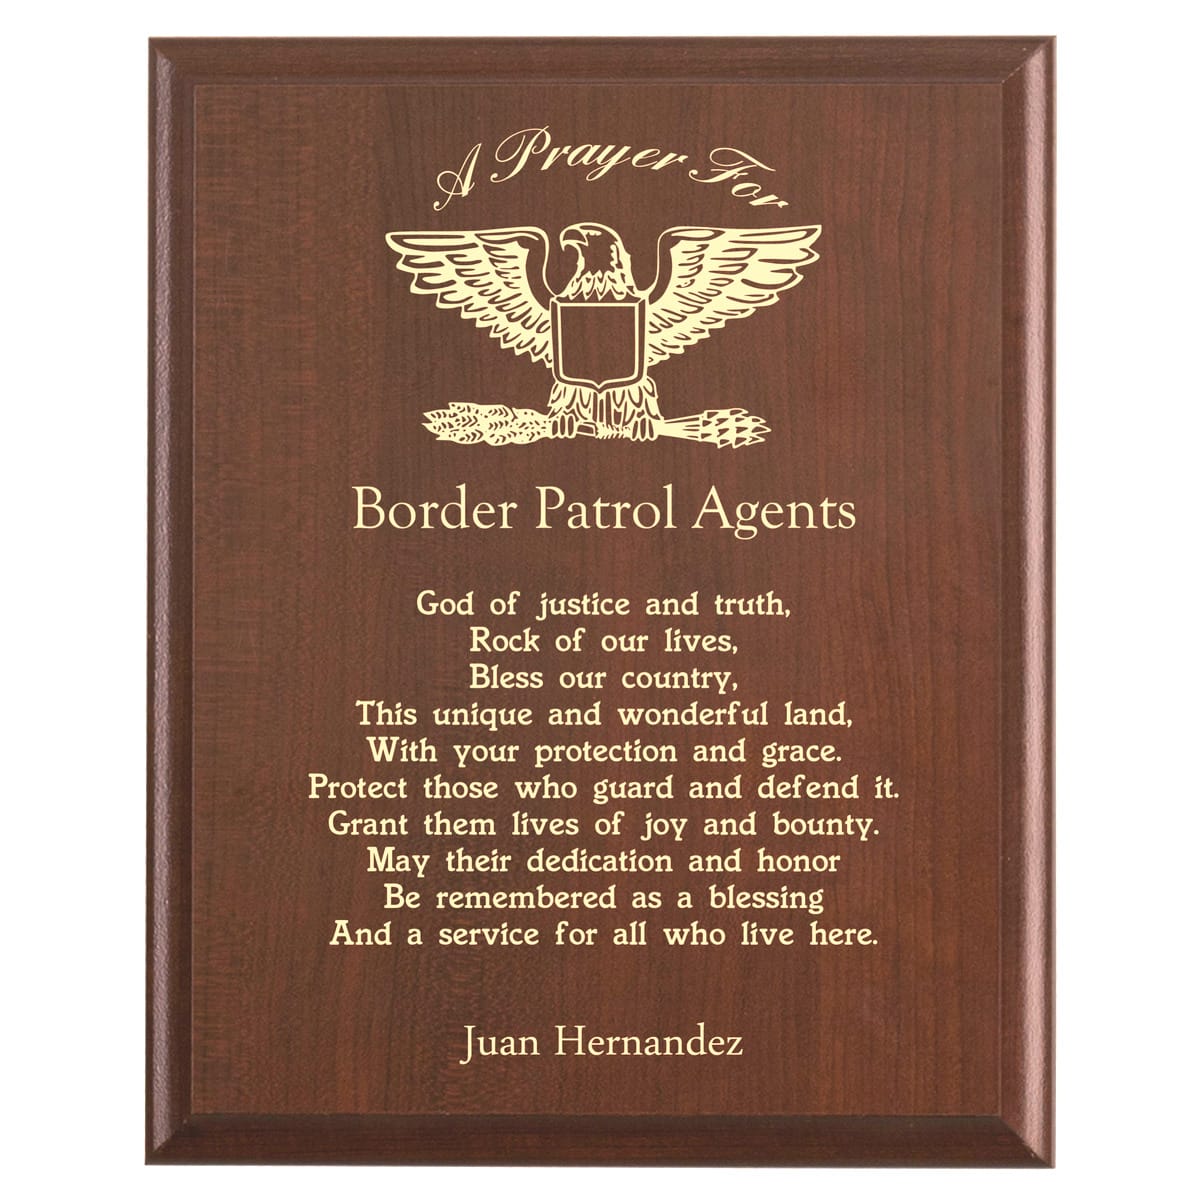 Plaque photo: Border Patrol Agent Prayer Plaque design with free personalization. Wood style finish with customized text.